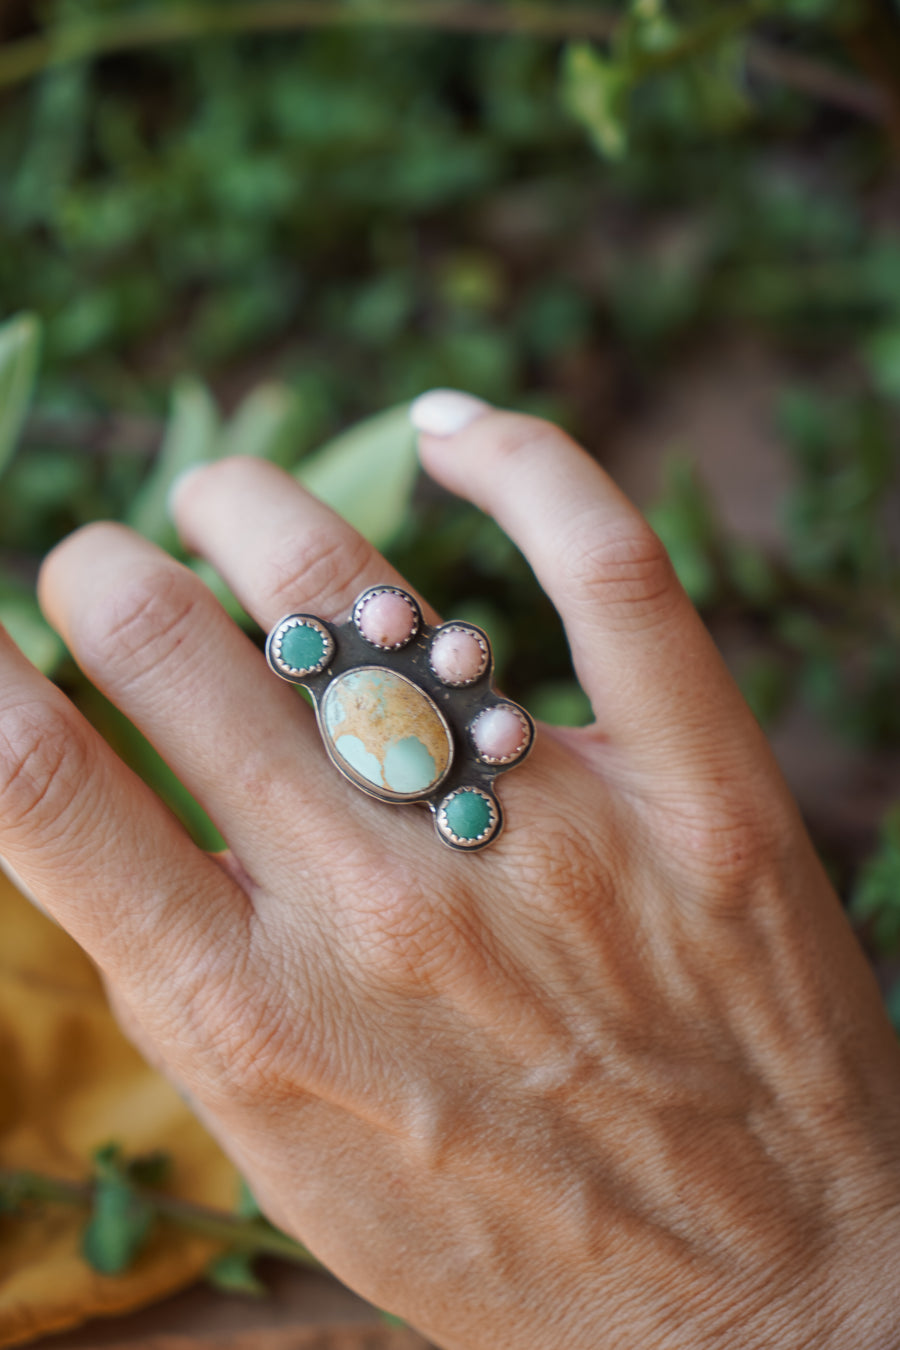 The Radial Ring with Cripple Creek, Pink Opal, and Yungai Turquoise (size 7)